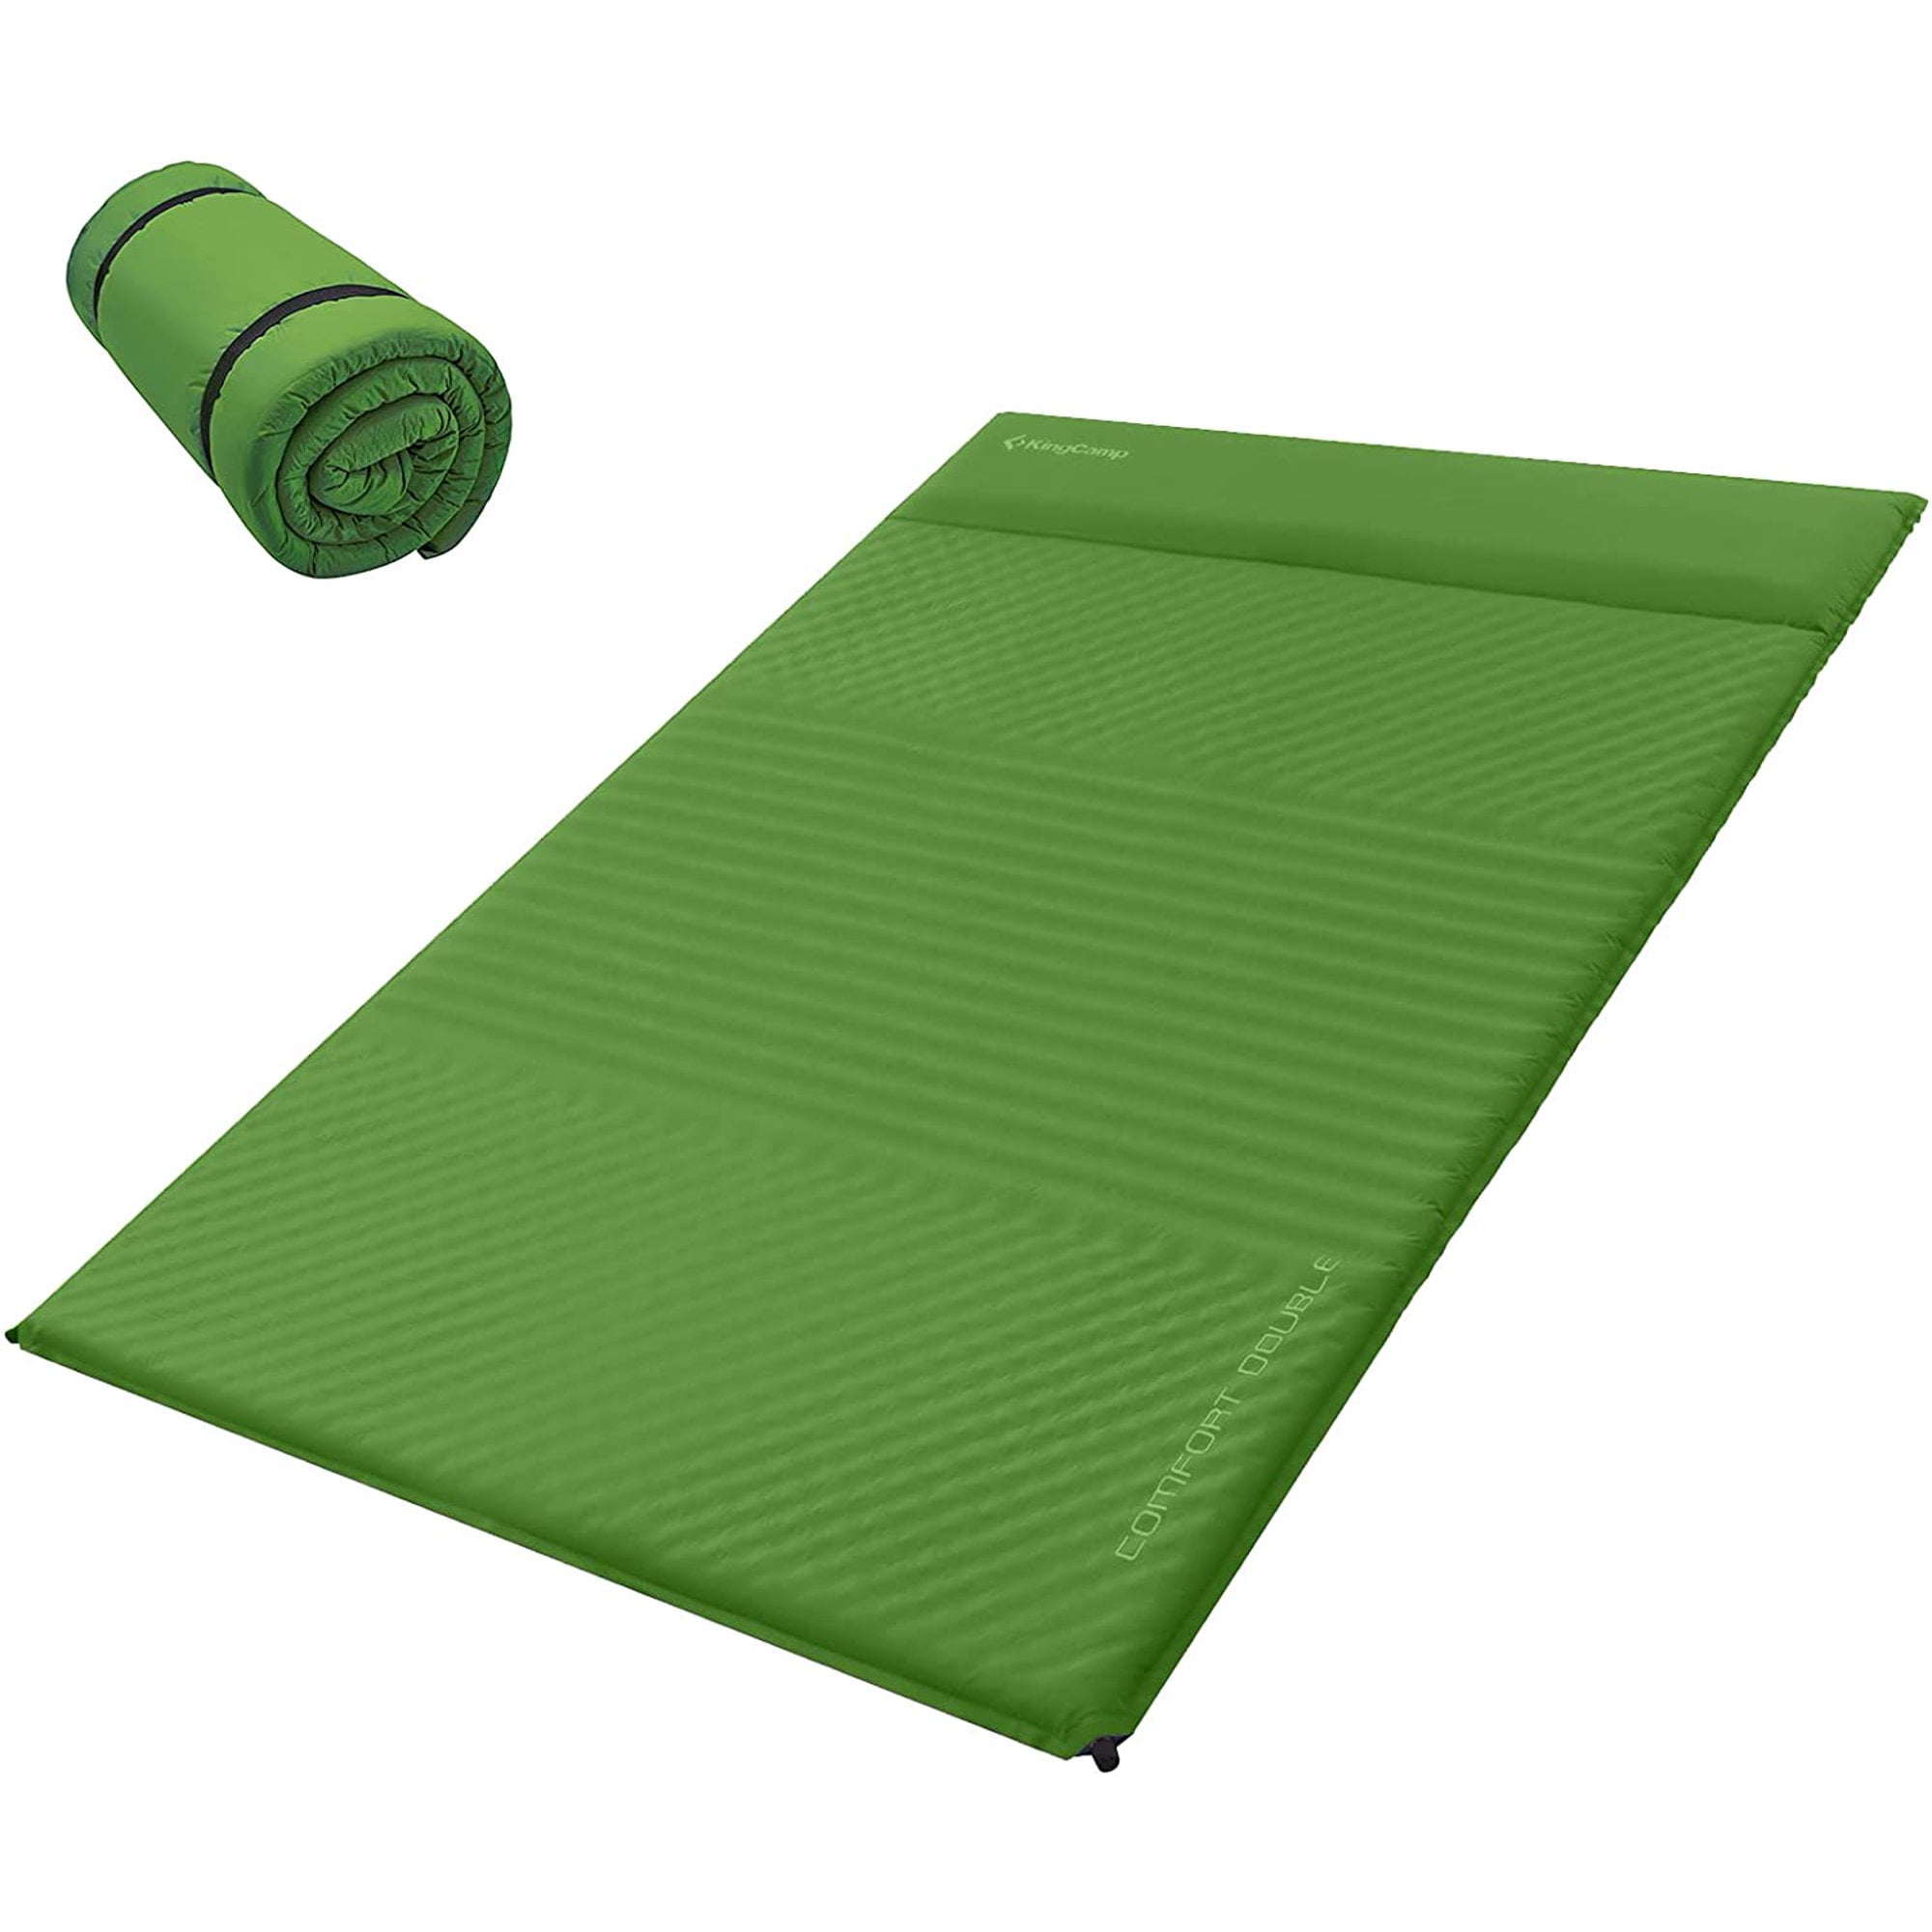 UOUNE Inflatable Sleeping Mat-Waterproof Camping Mattress,Double-Sided Color Air 